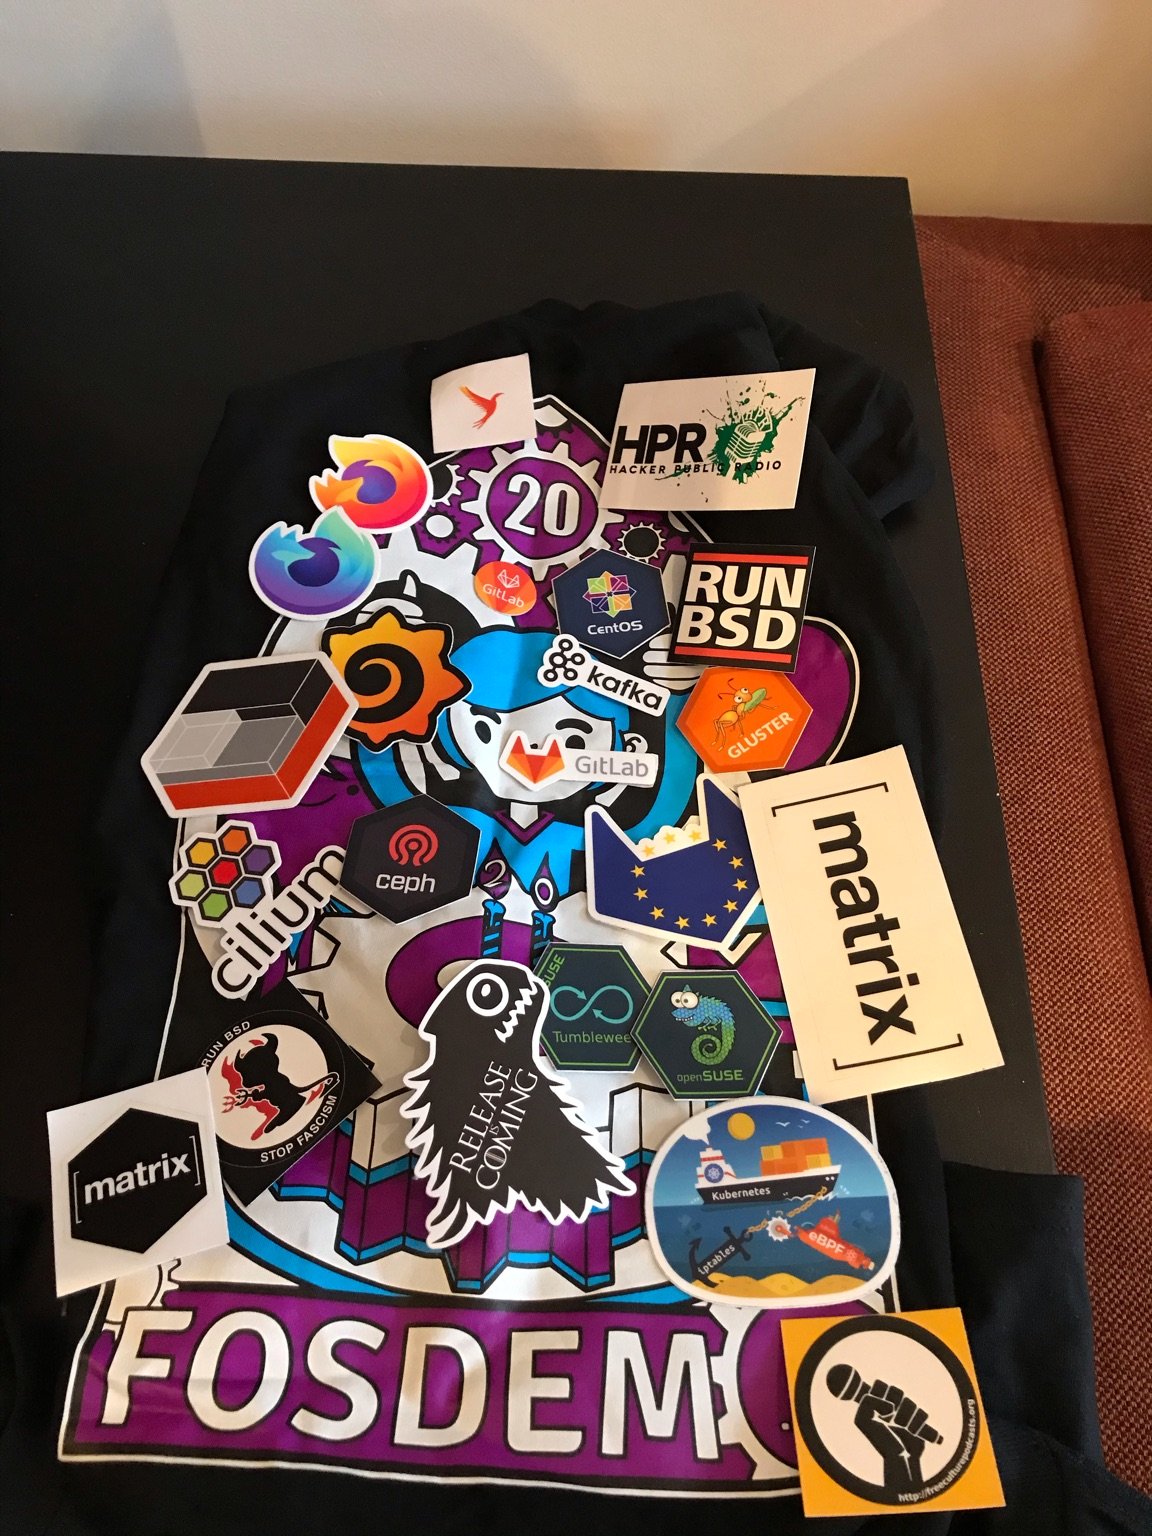 Some of my new favourite stickers in there.